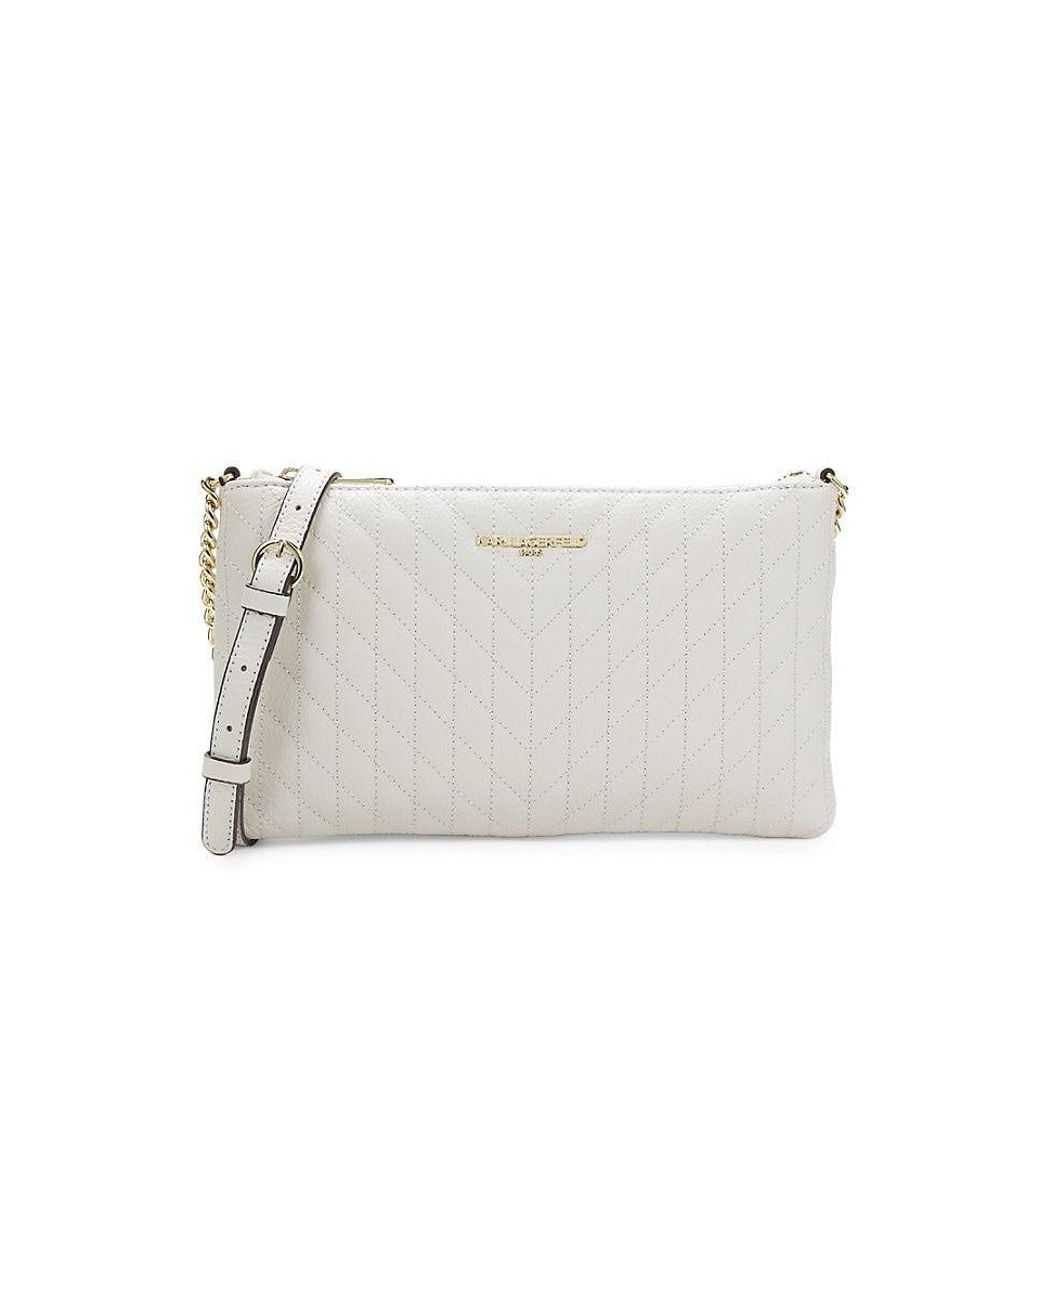 Karl Lagerfeld Quilted Leather Crossbody Bag in White | Lyst